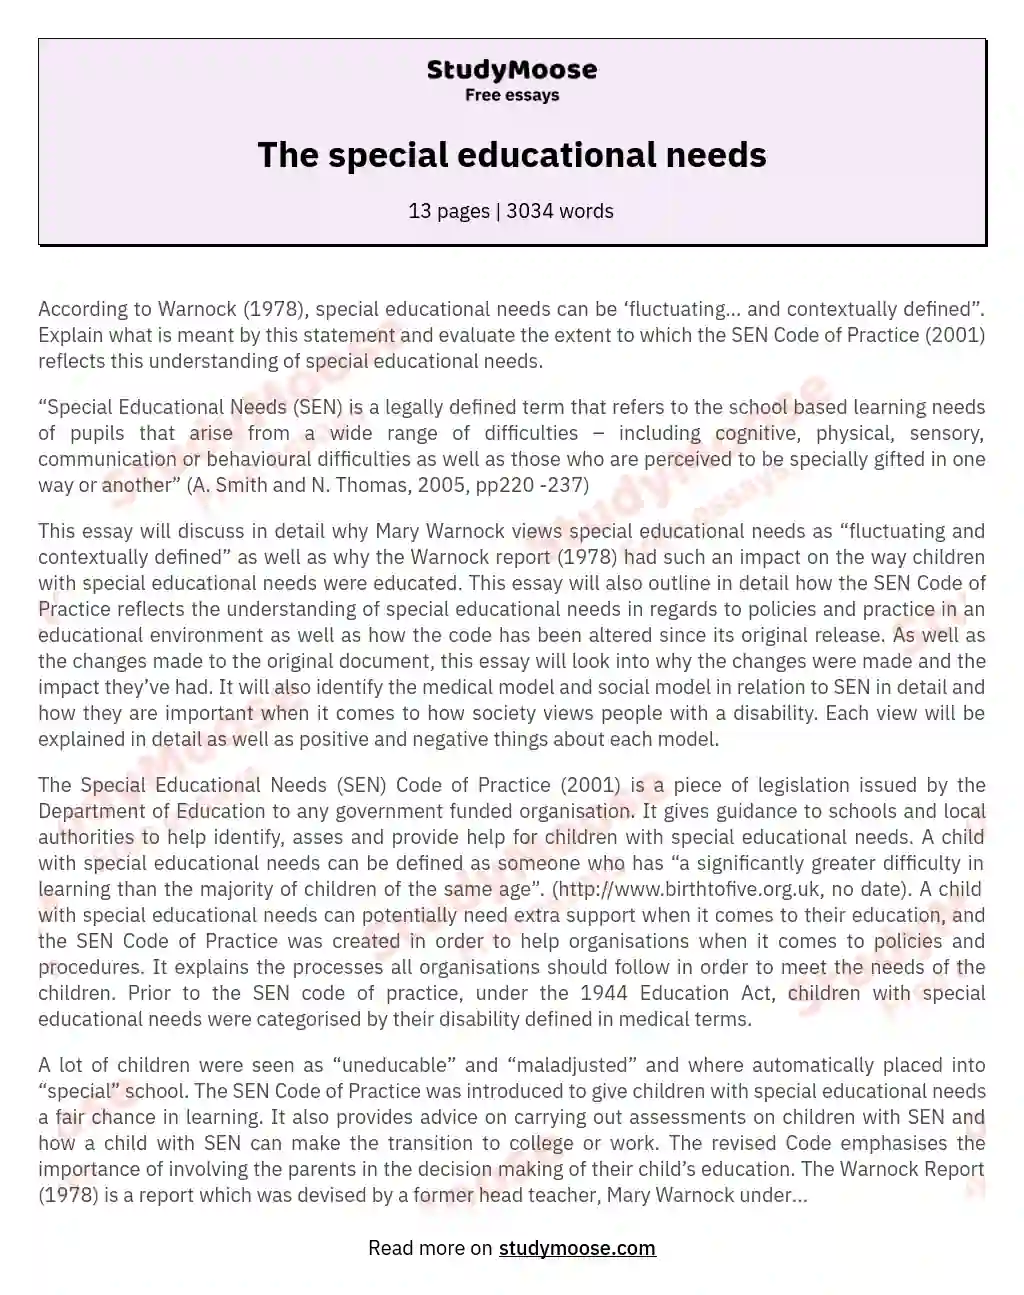 The special educational needs